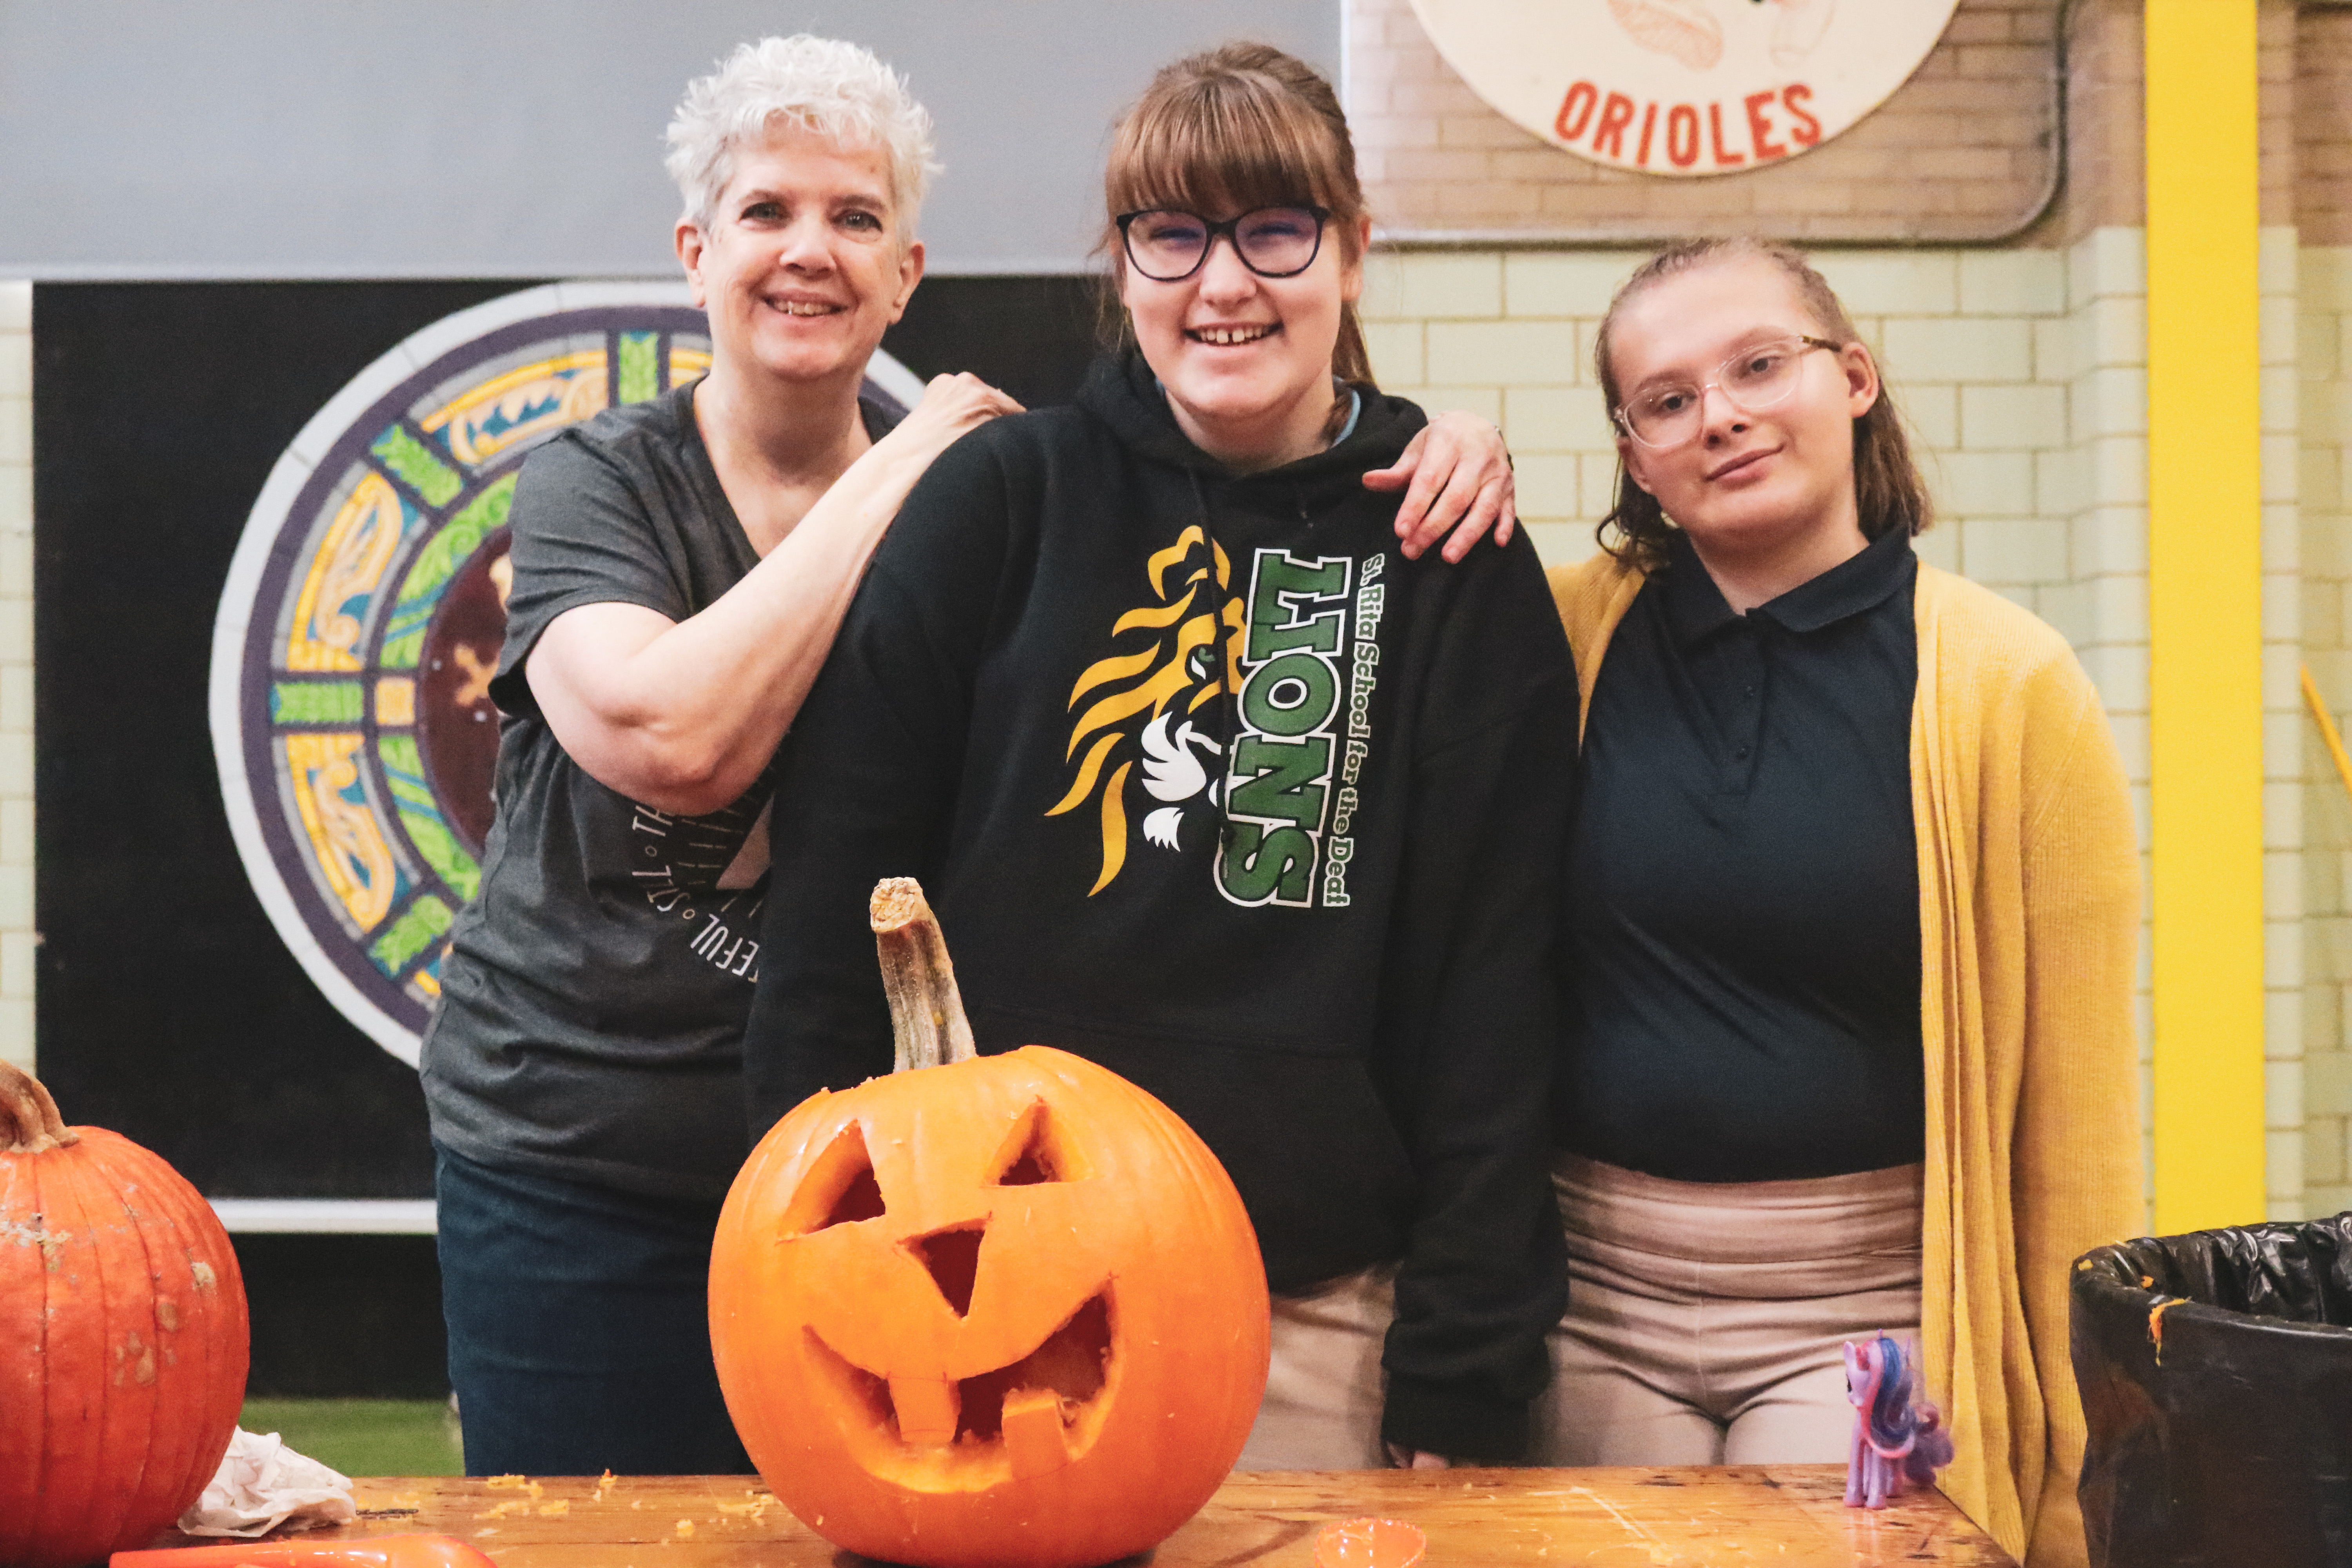 a teacher with two female students smiling with a carved pumpkin